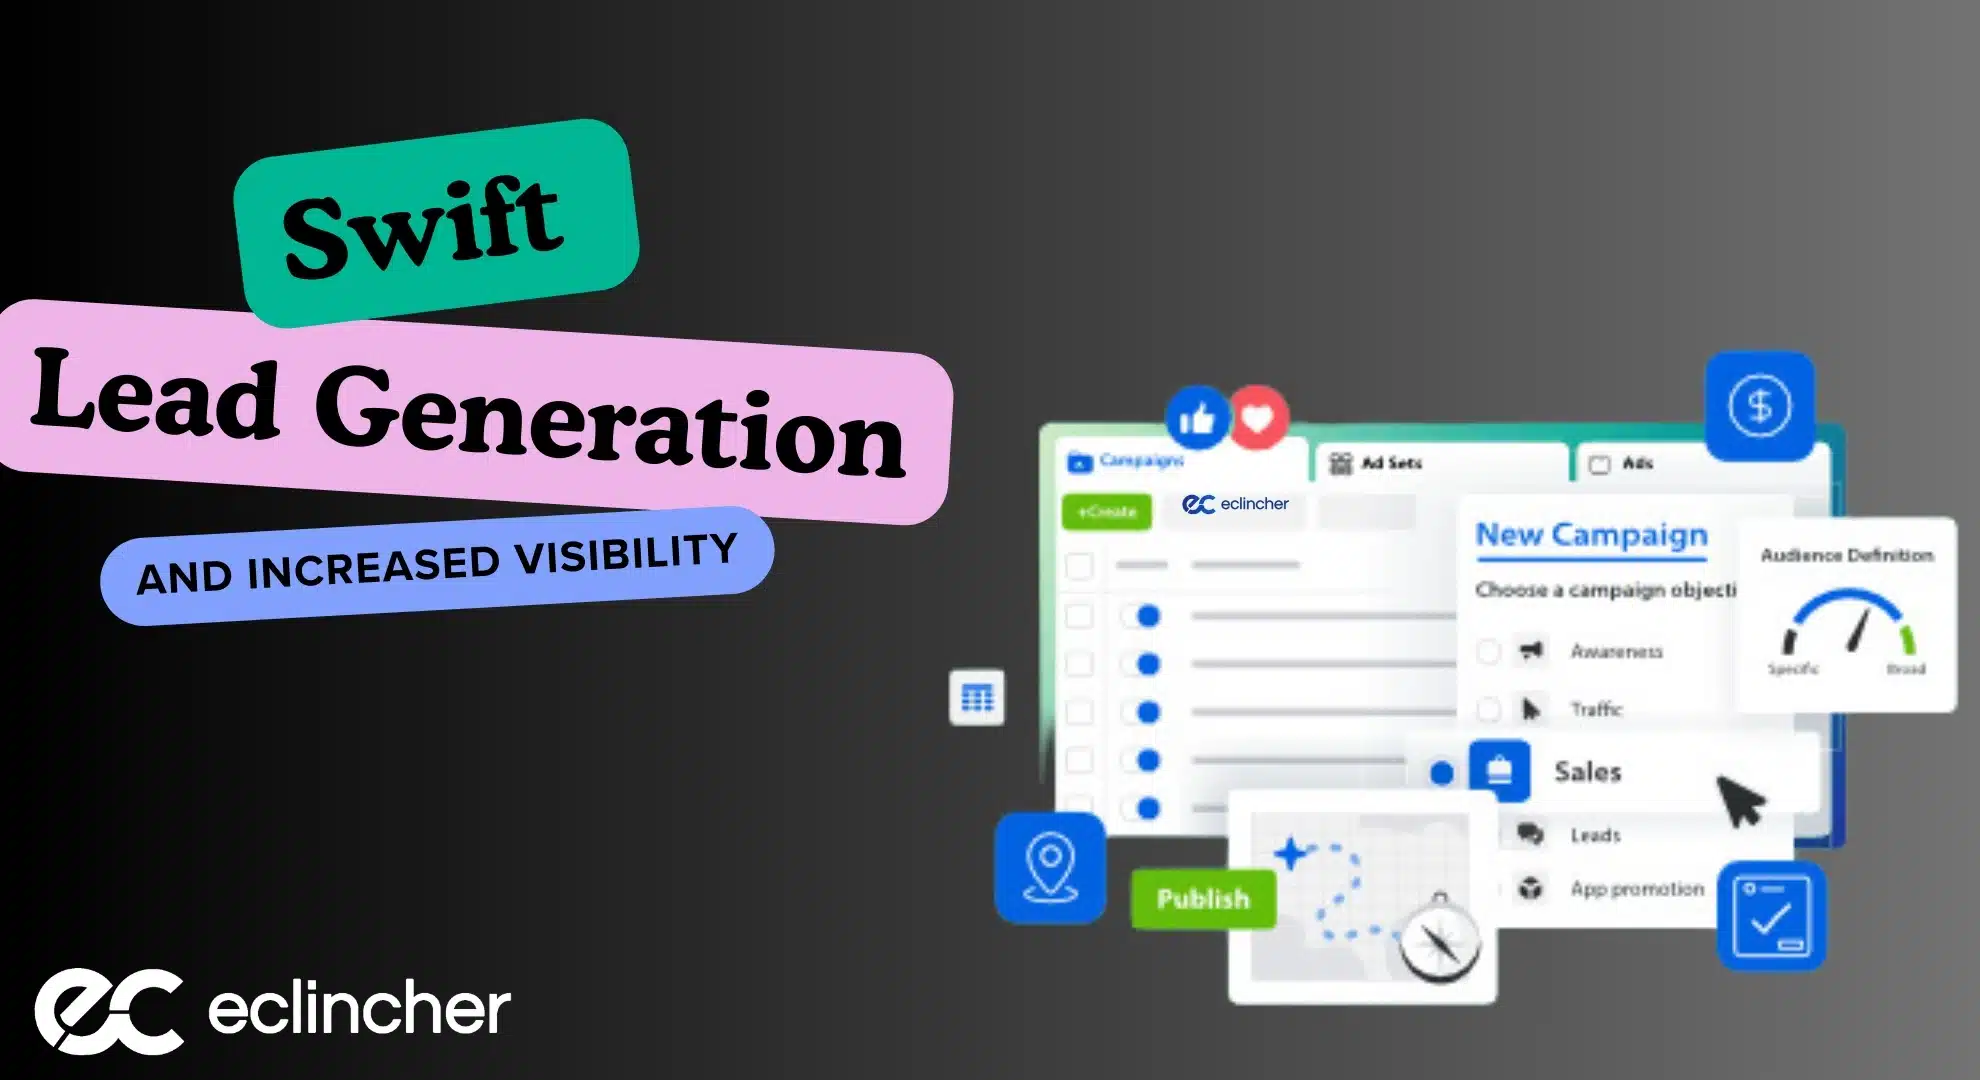 Swift Lead Generation and Increased Visibility